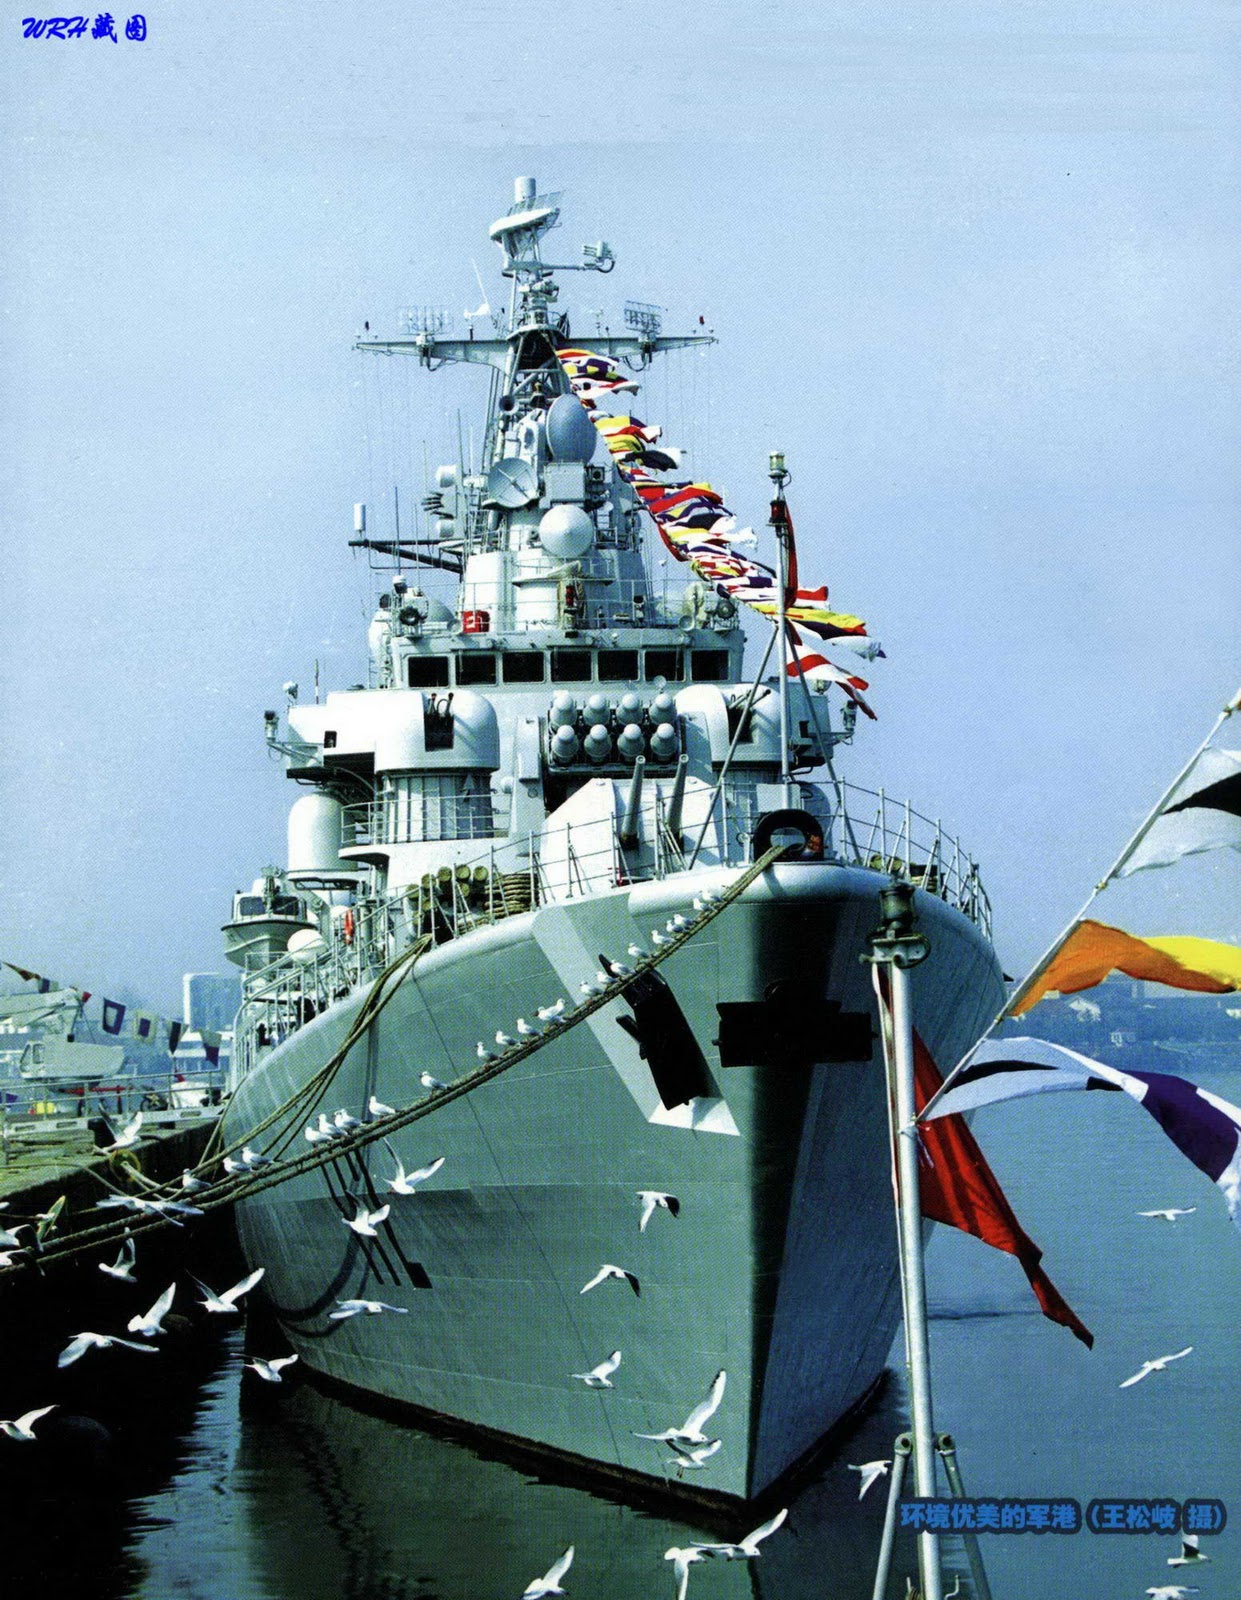 112+Harbin+113+Qingdao+Type+052+Luhu-class+guided+missile+destroyers+people%27s+Liberation+Army+Navy+%28PLAN%29+YJ-83+%28C-803%29+anti-ship+missiles+HQ-7+SAM+%28Type+730%29+7-barrel+30+mm+CIWS+%283%29.jpg